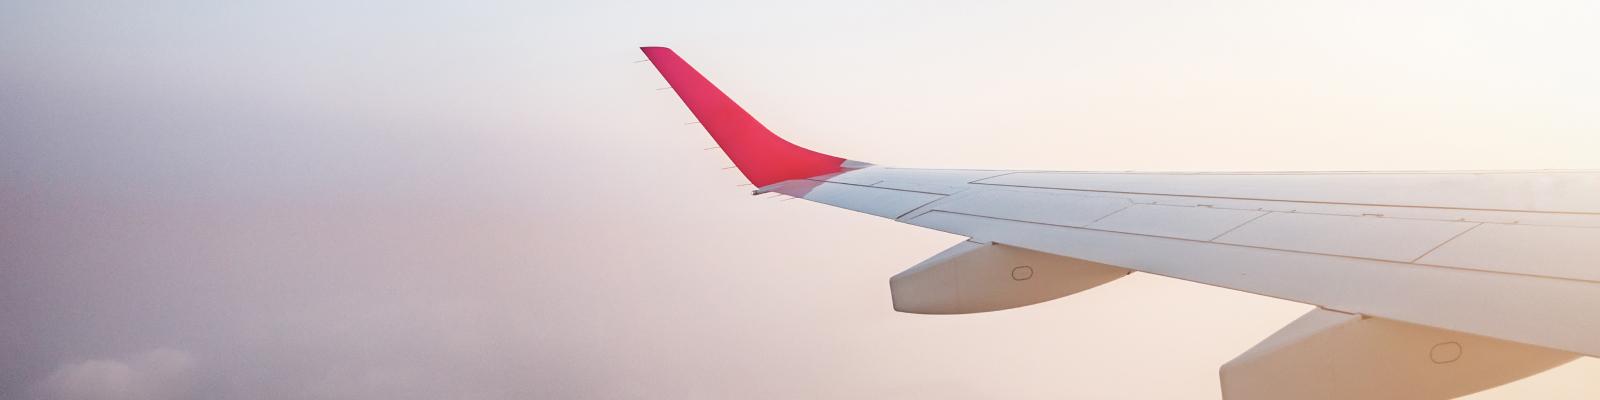 A red and white airplane wing.